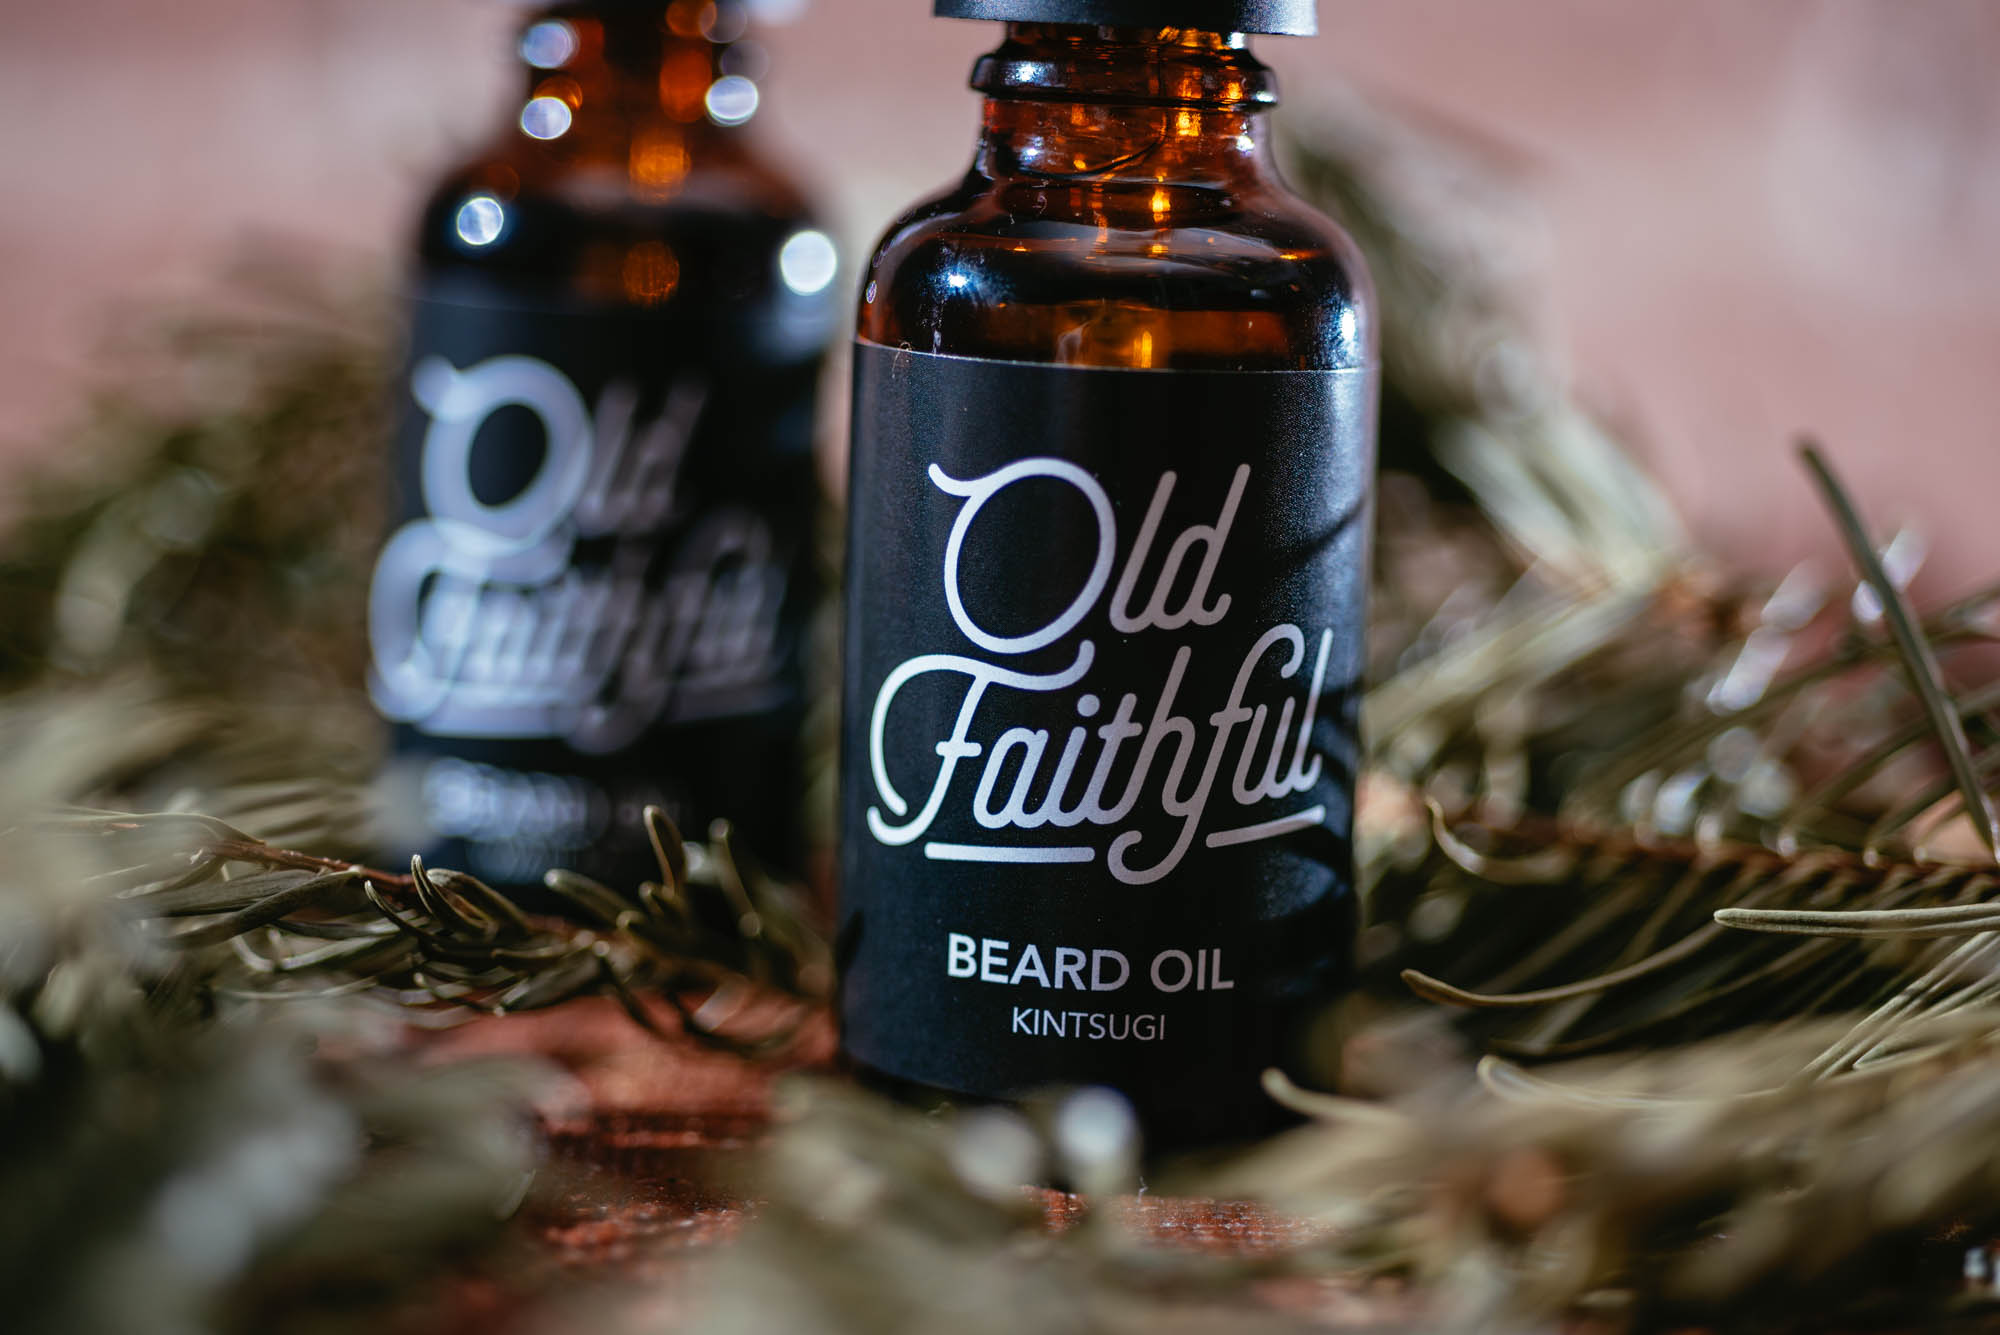 A photo of two bottles of beard oil